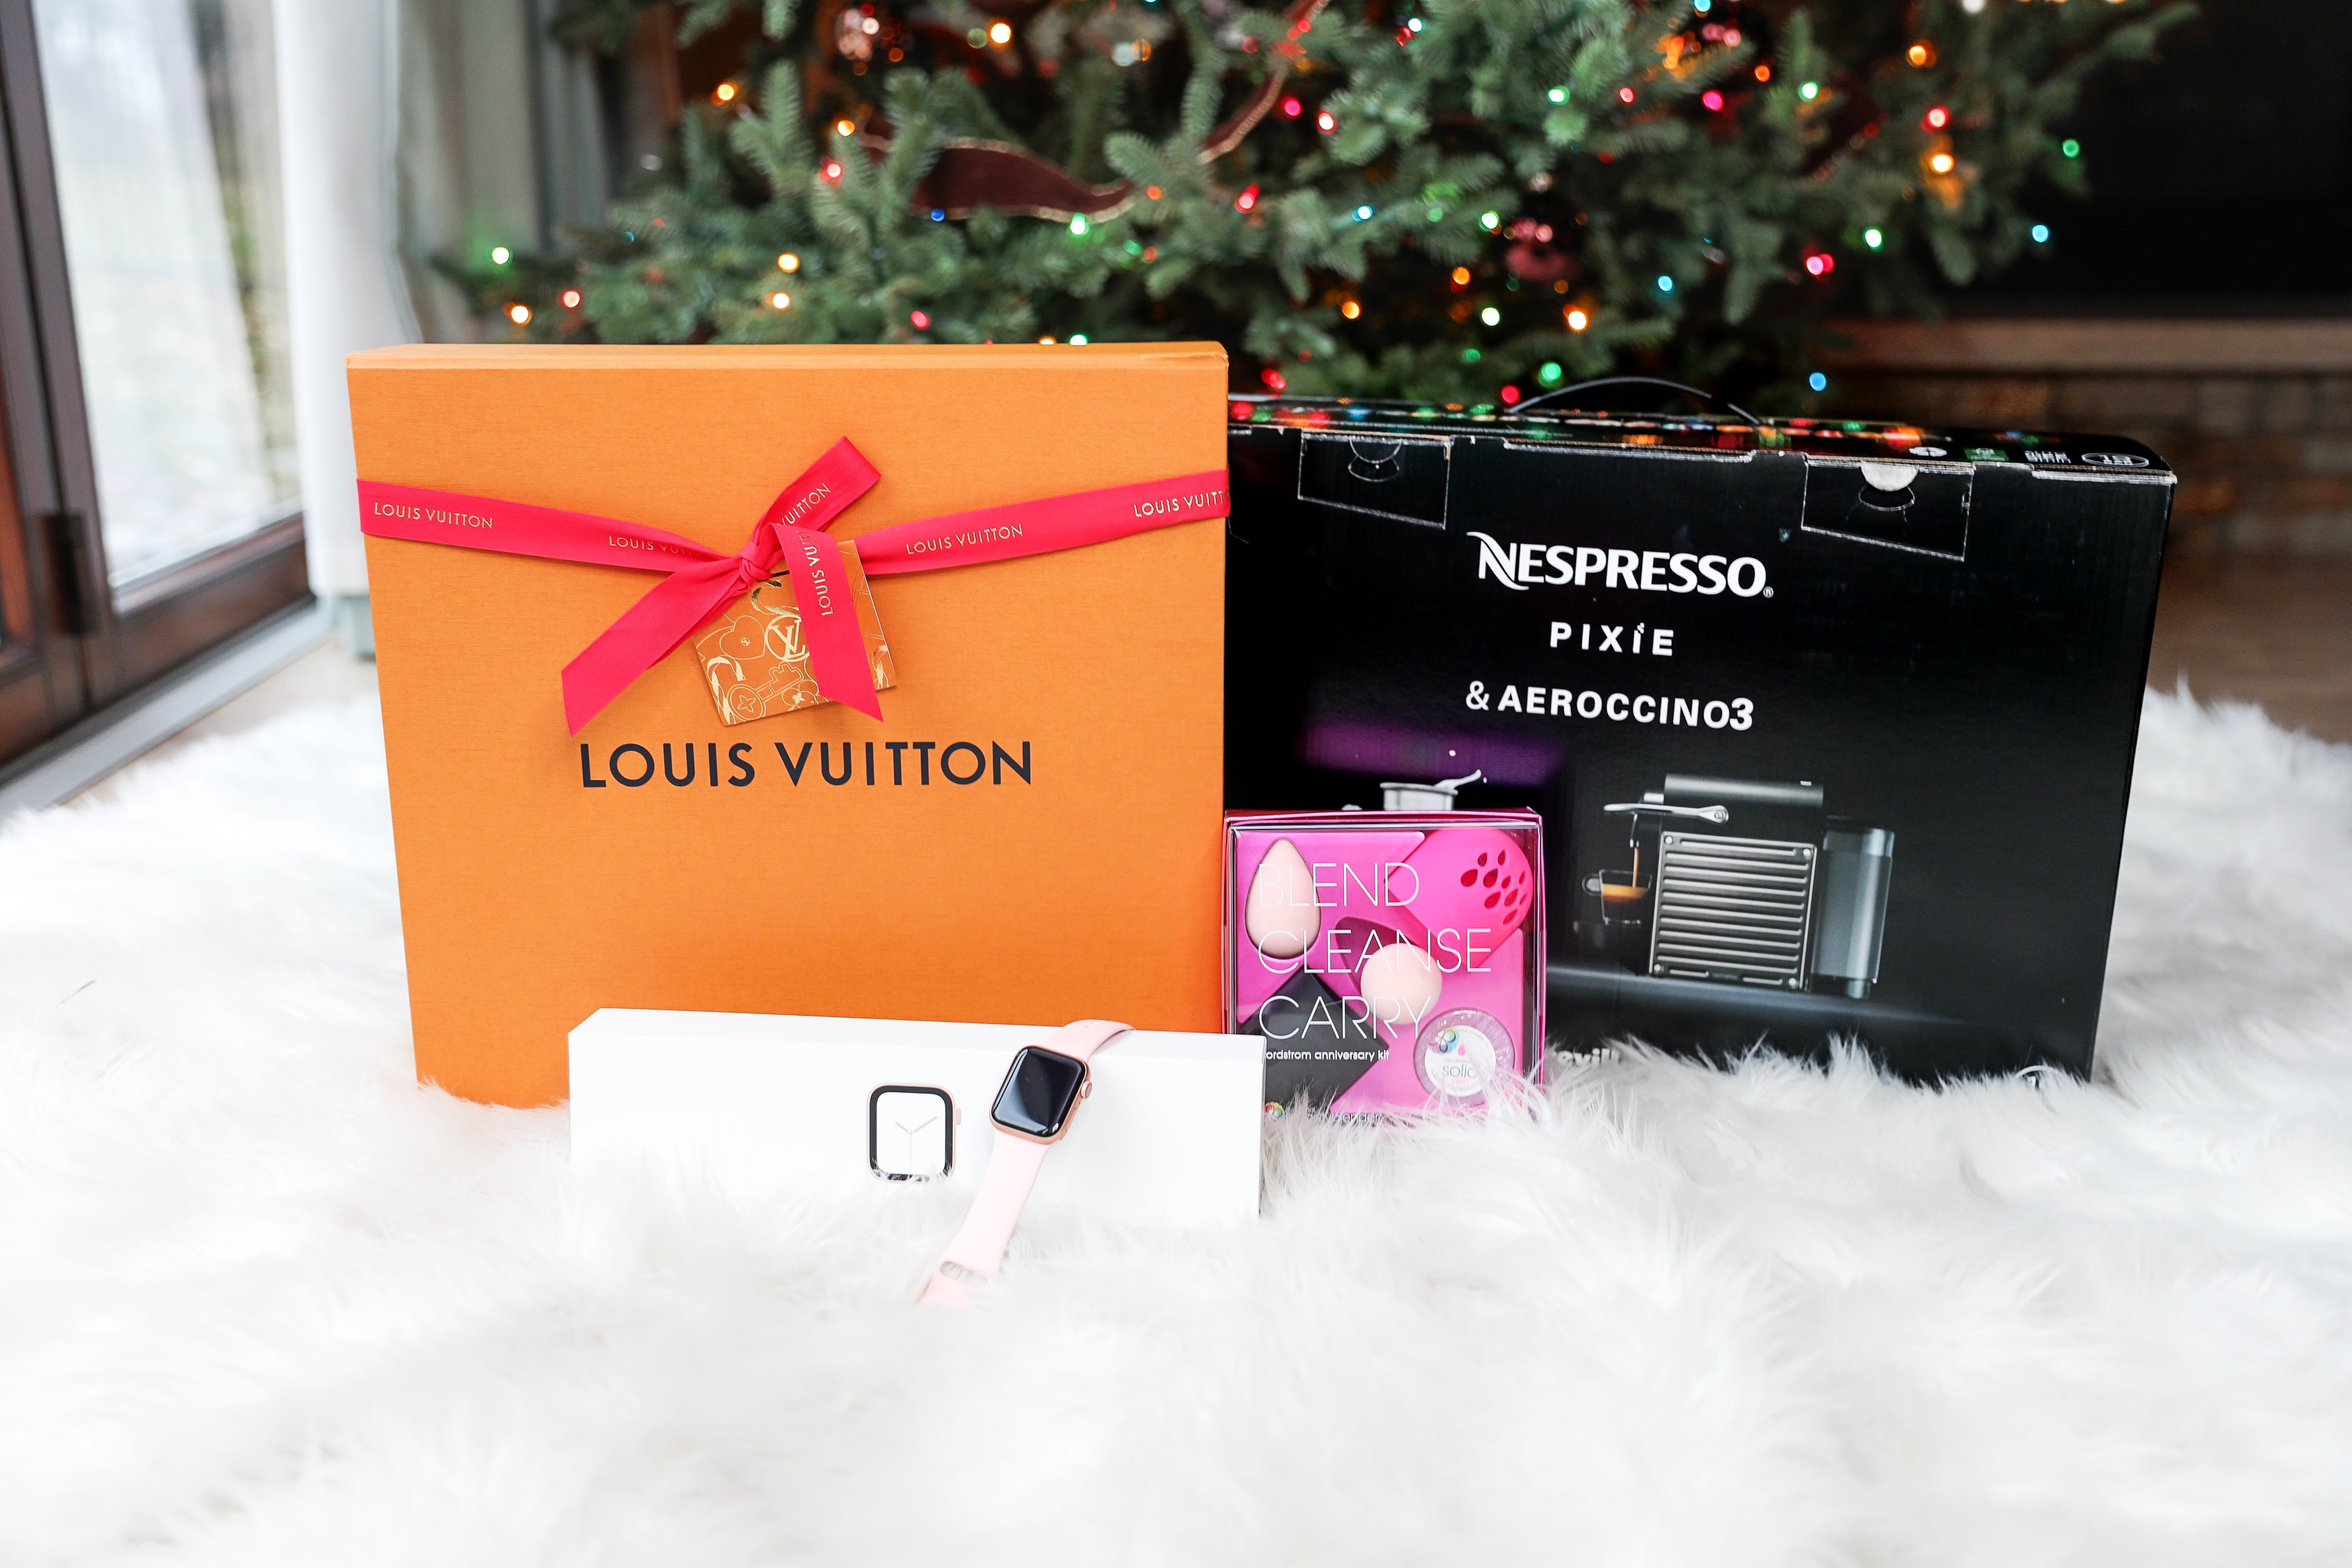 Louis Vuitton MASSIVE(ly inexpensive) Haul & Unboxing Christmas